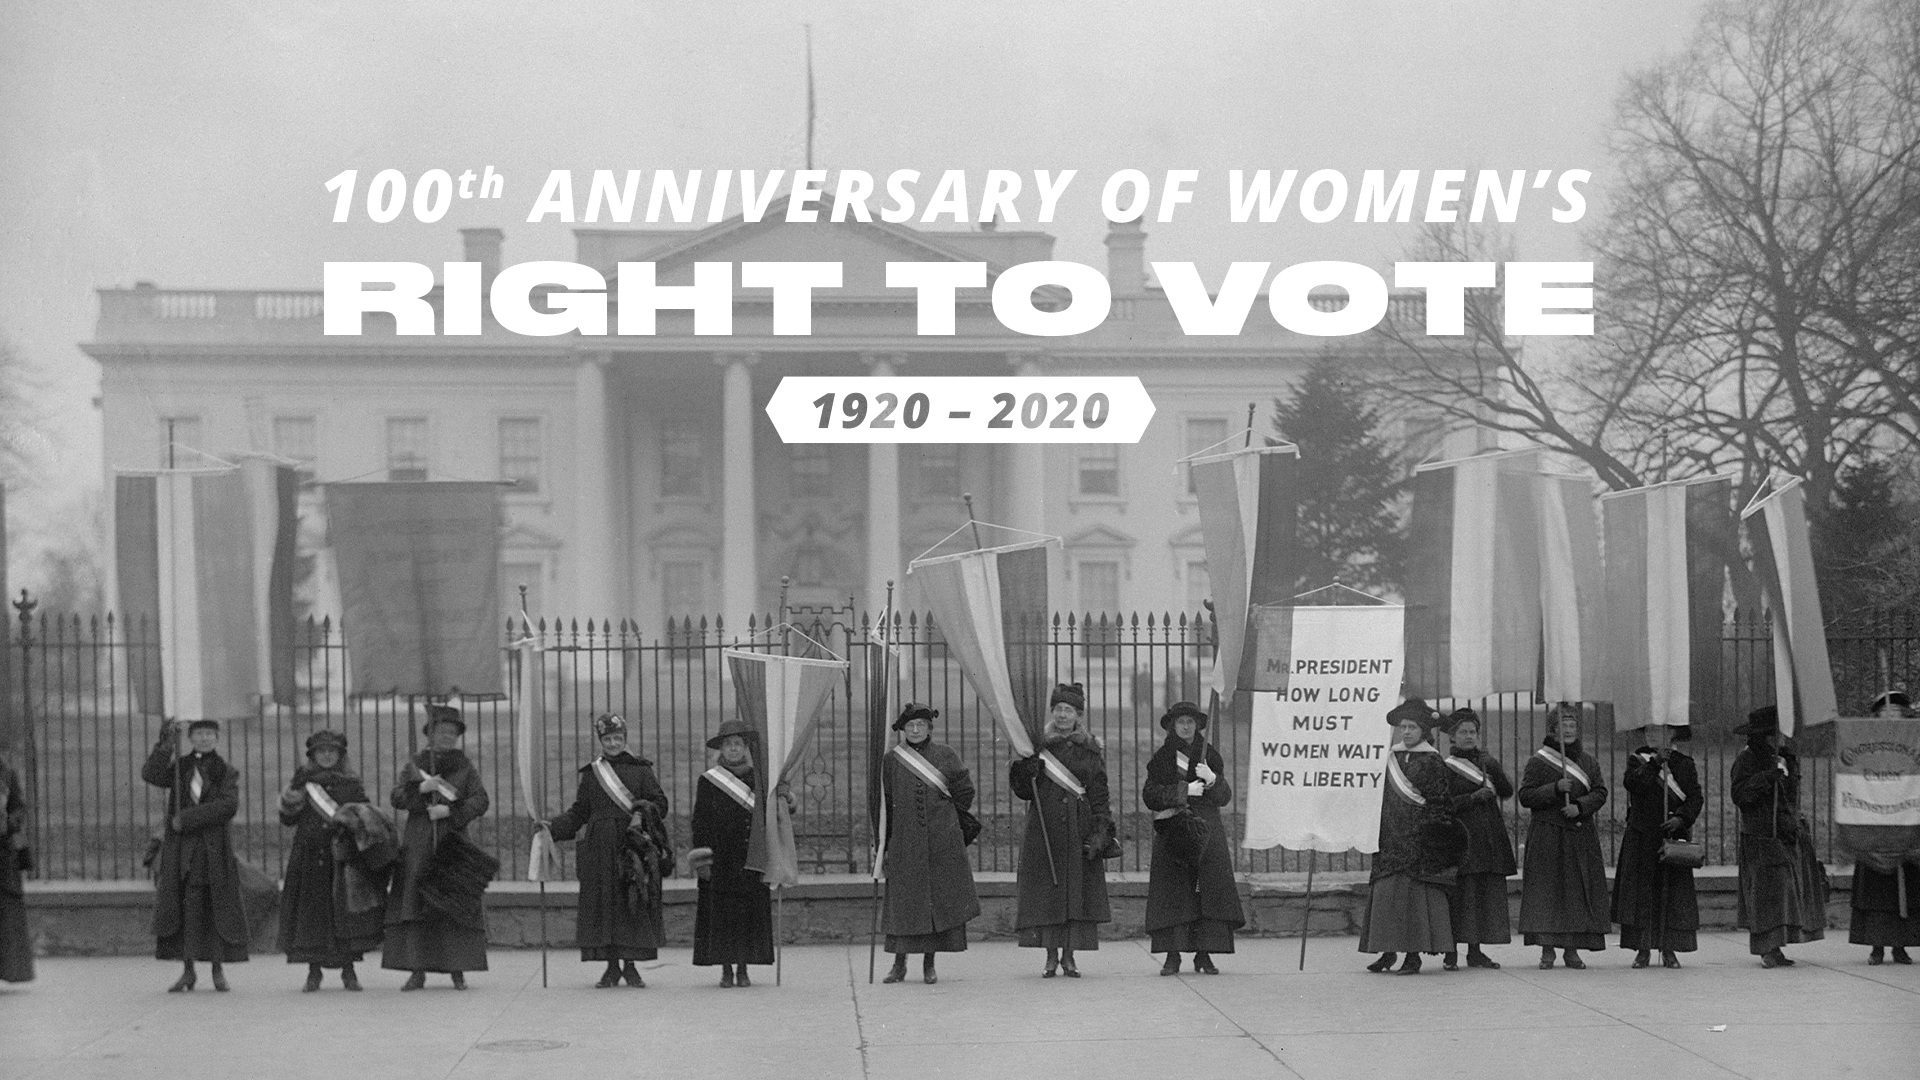 Women in the United States by the Numbers: 1920 Versus 2020